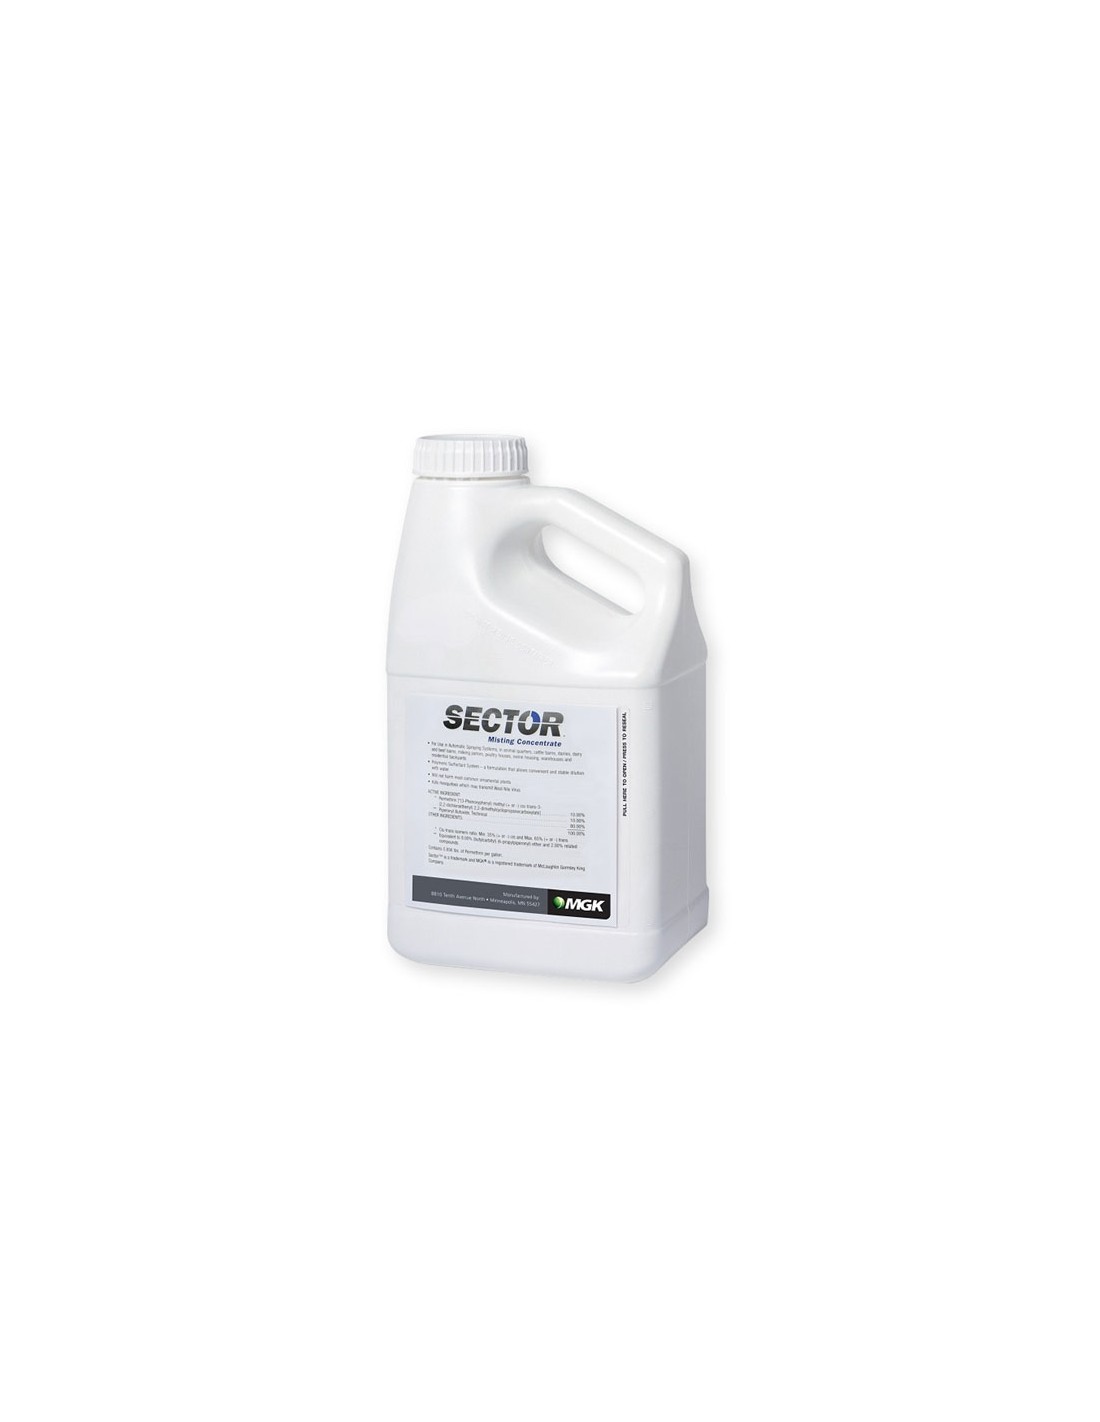 Sector Misting Concentrate - Gallon Questions & Answers